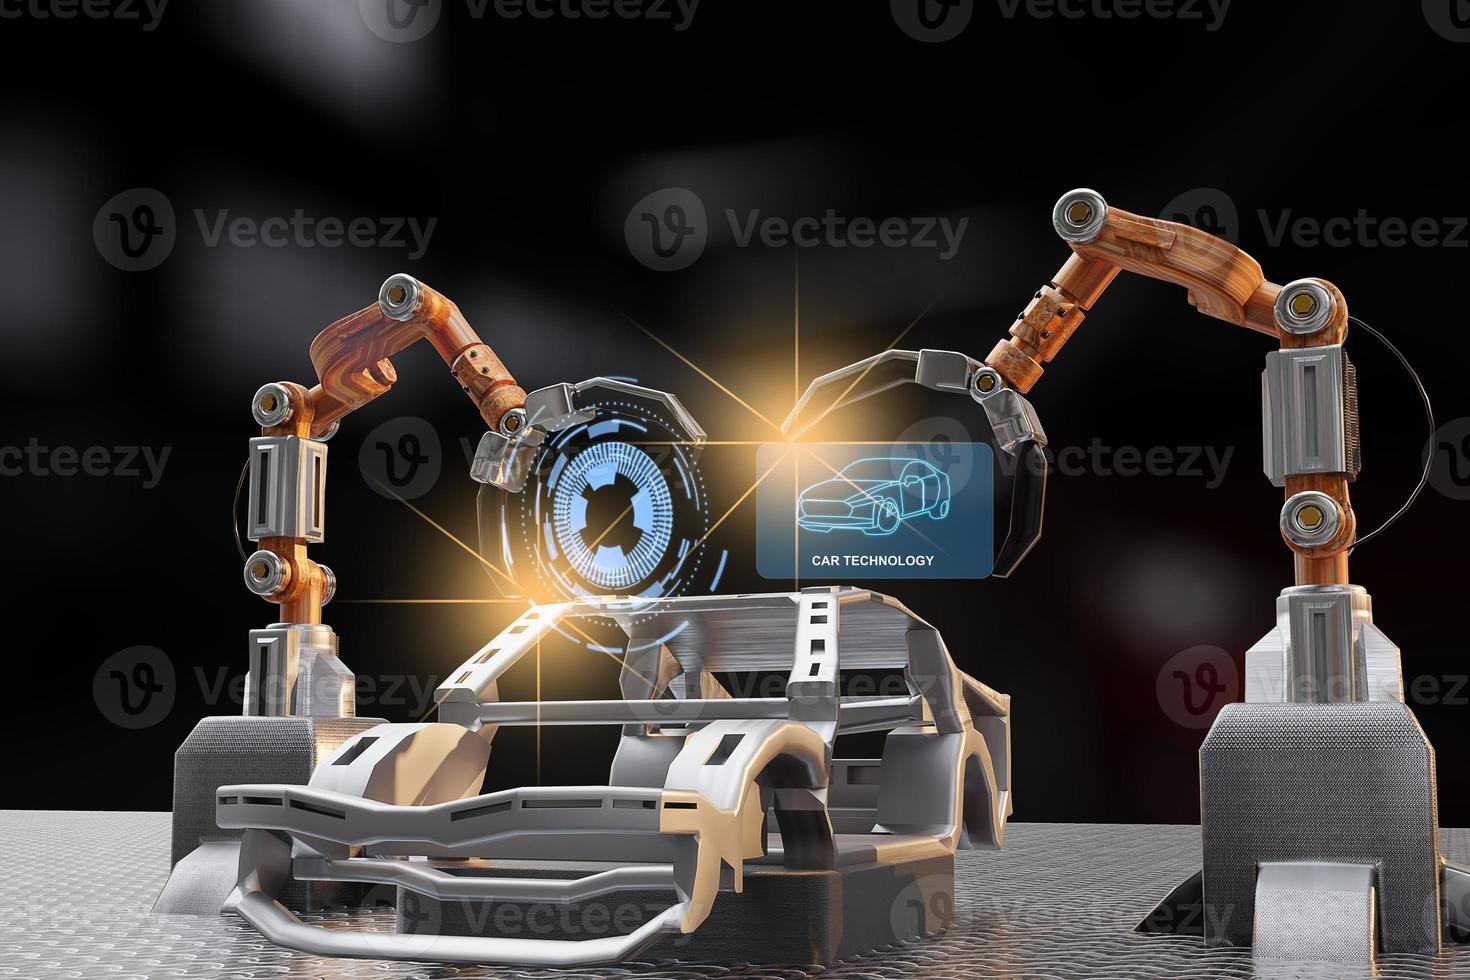 Car production processing service in factory robot hi tech robotic AI control arm hand robot artificial for car technology in garage dealership with tech hand cyborg 2022 3D RENDER photo